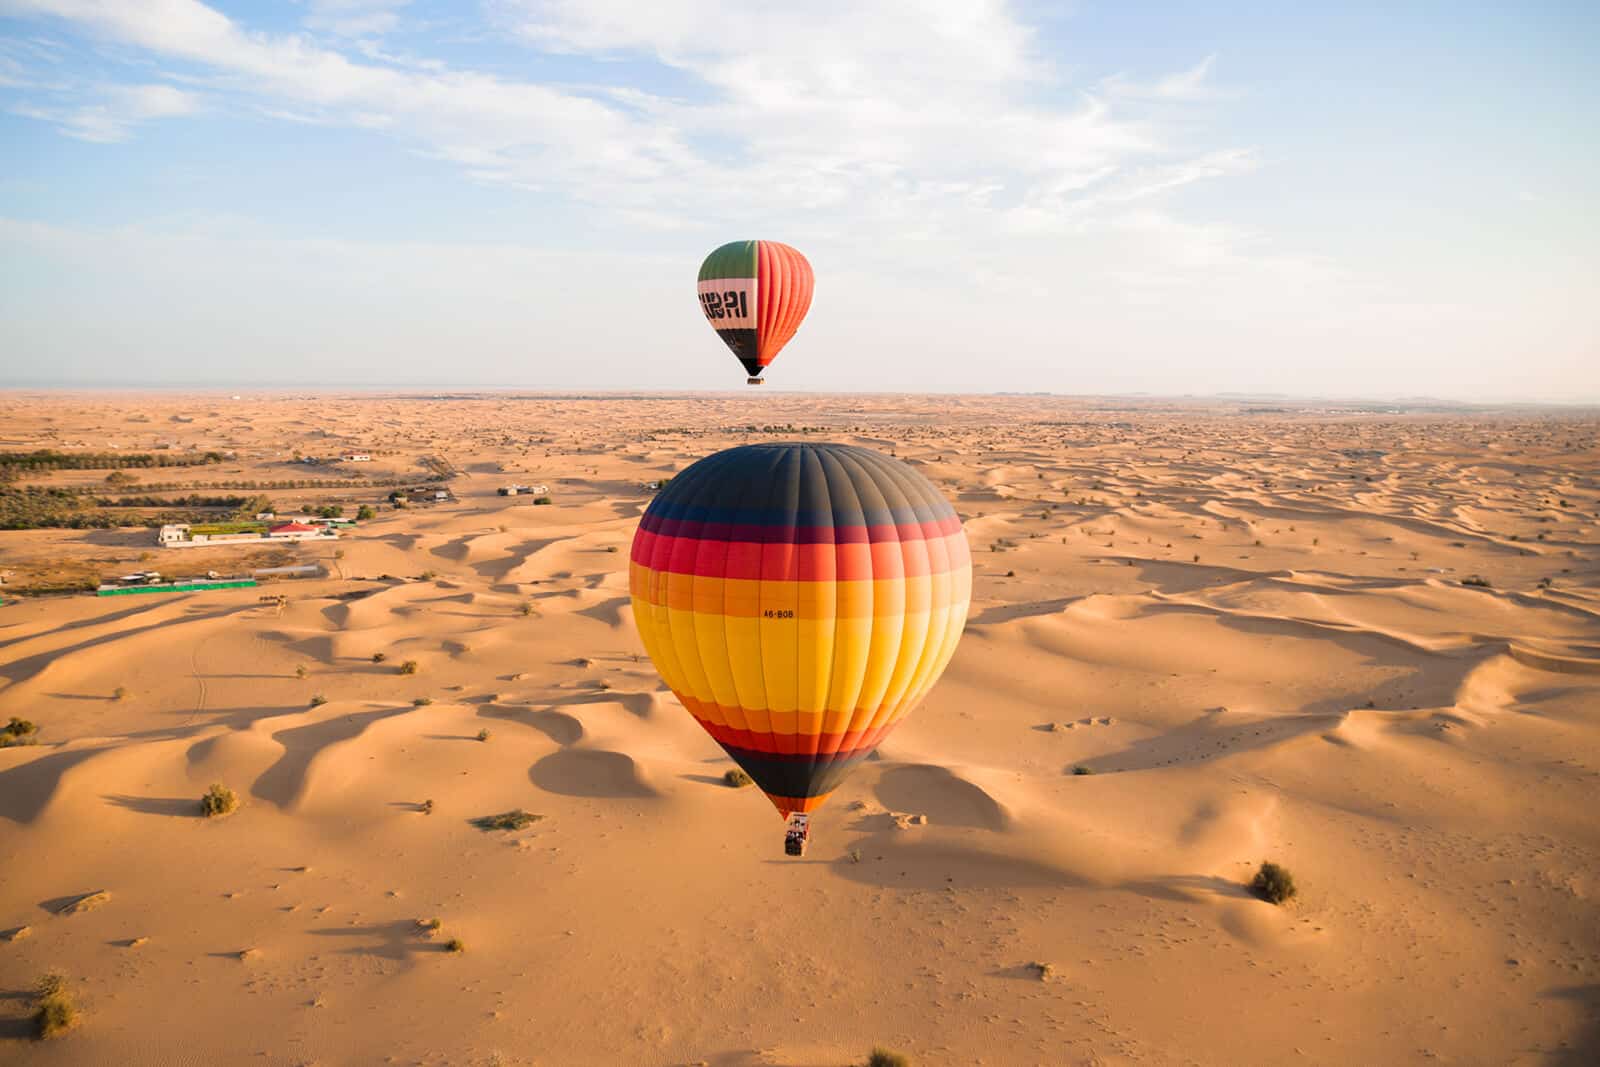 List Of Seven Historical And Cultural Activities To Do In The UAE For Couples.